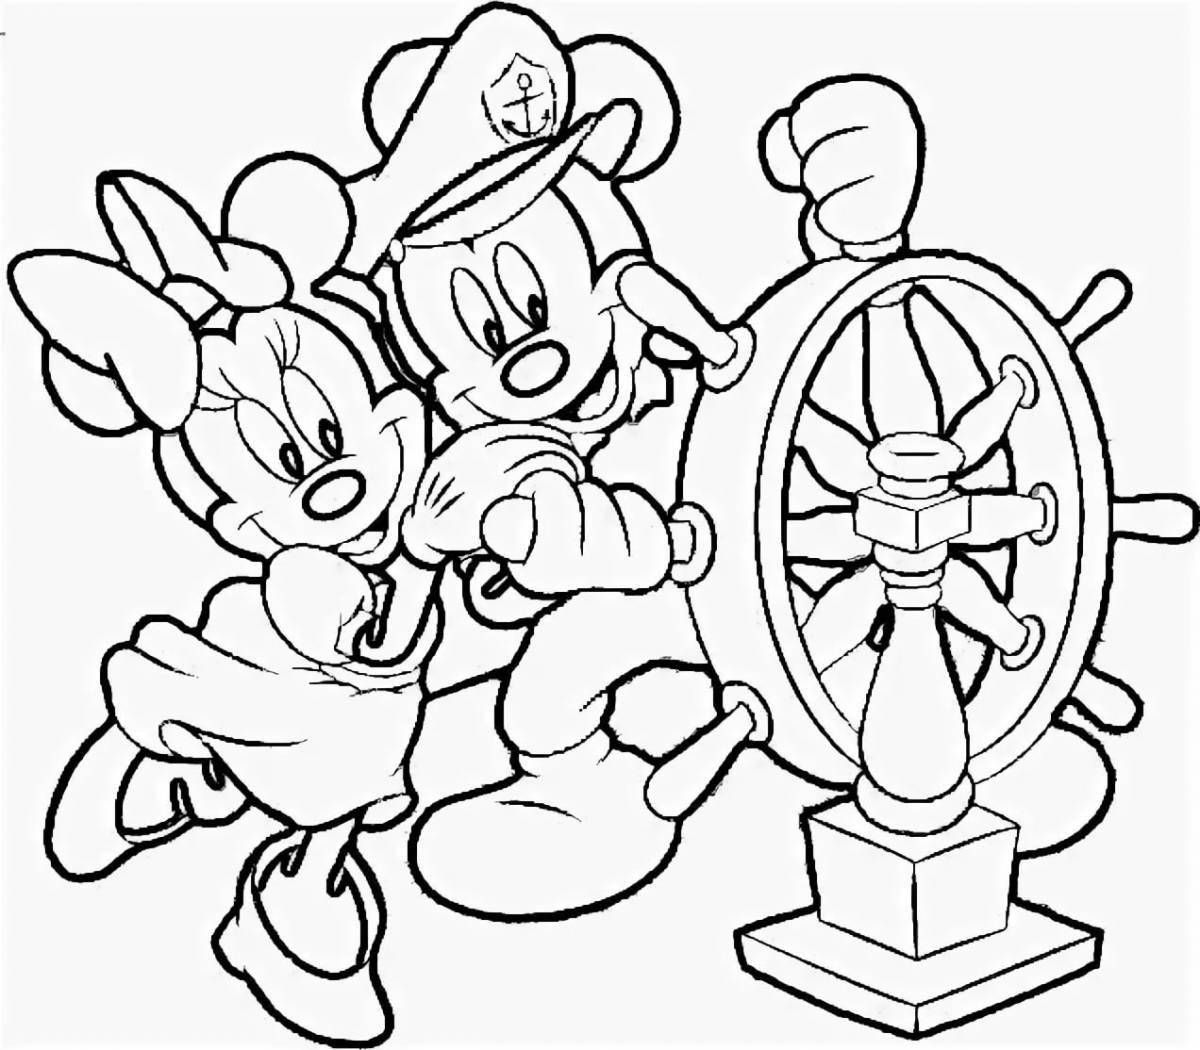 Invitation coloring page turn on